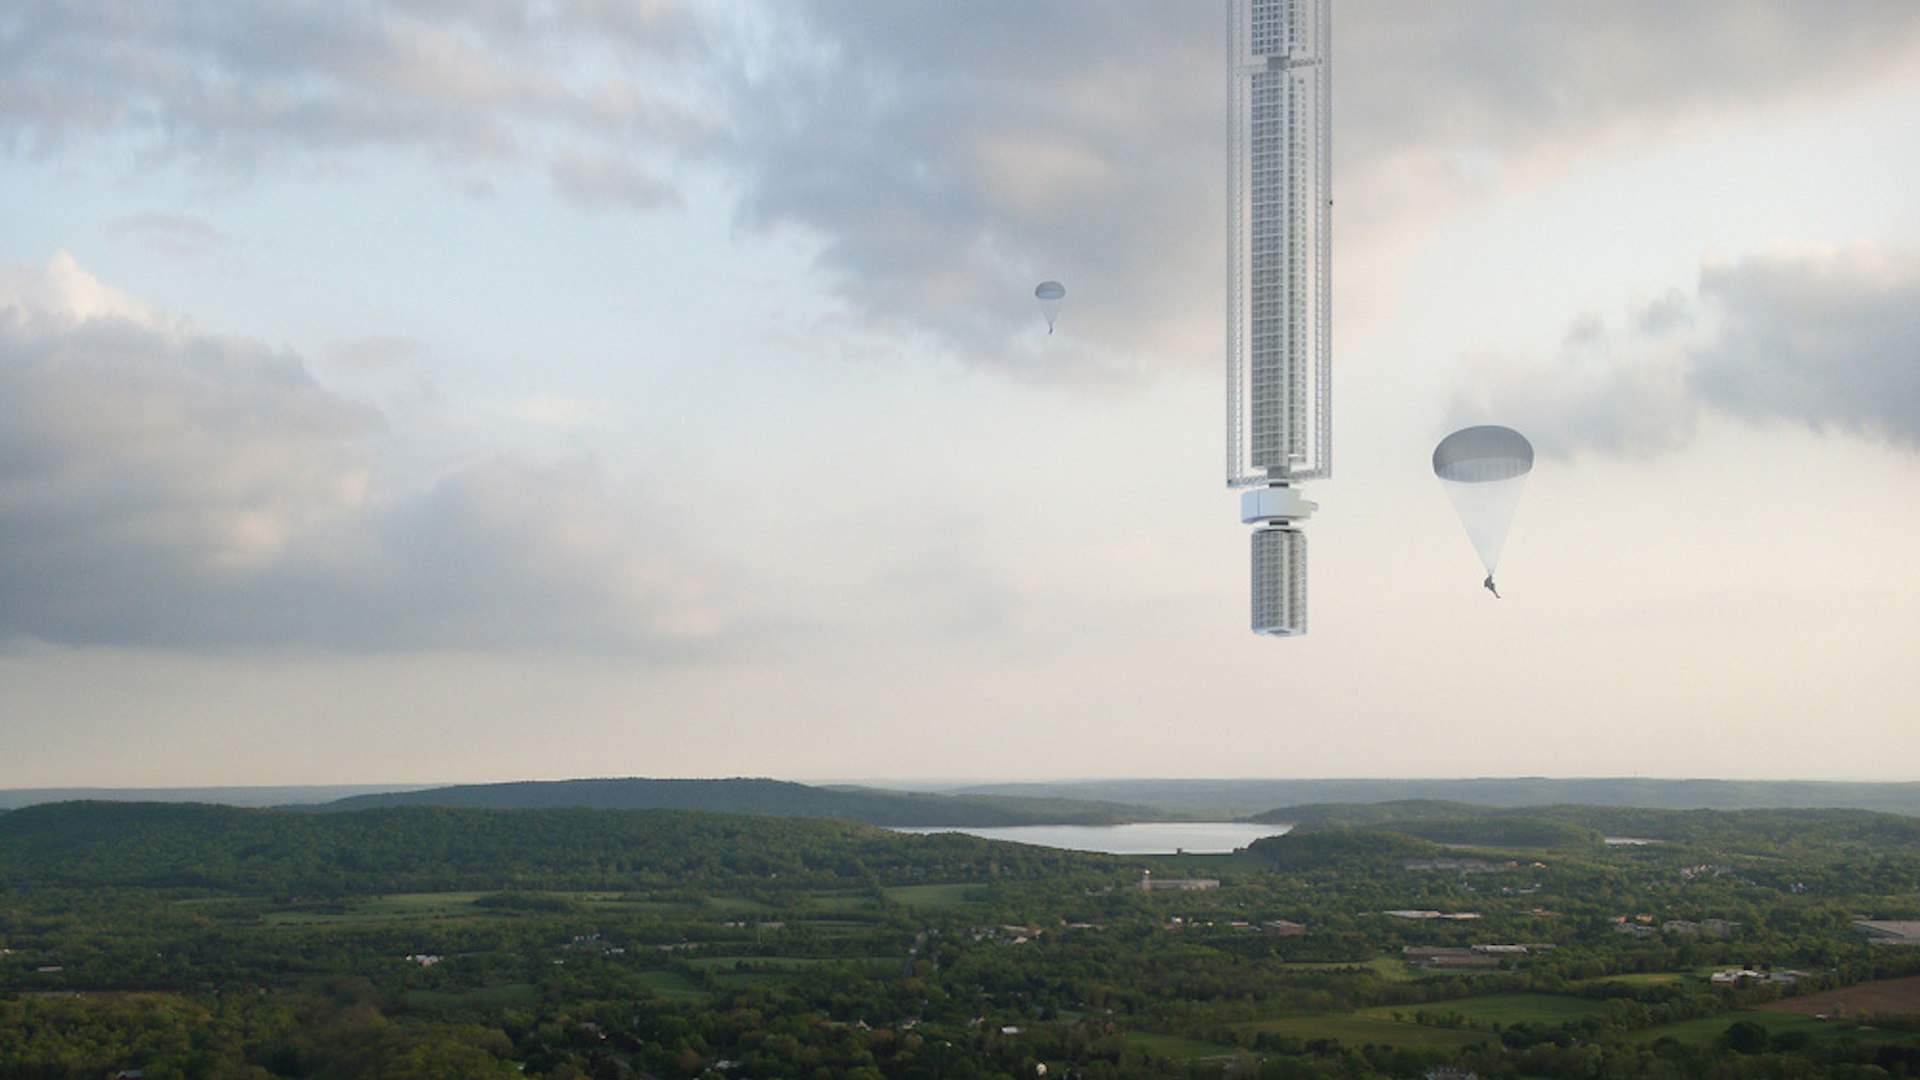 This Sky-High Building Design Casually Hangs From An Asteroid